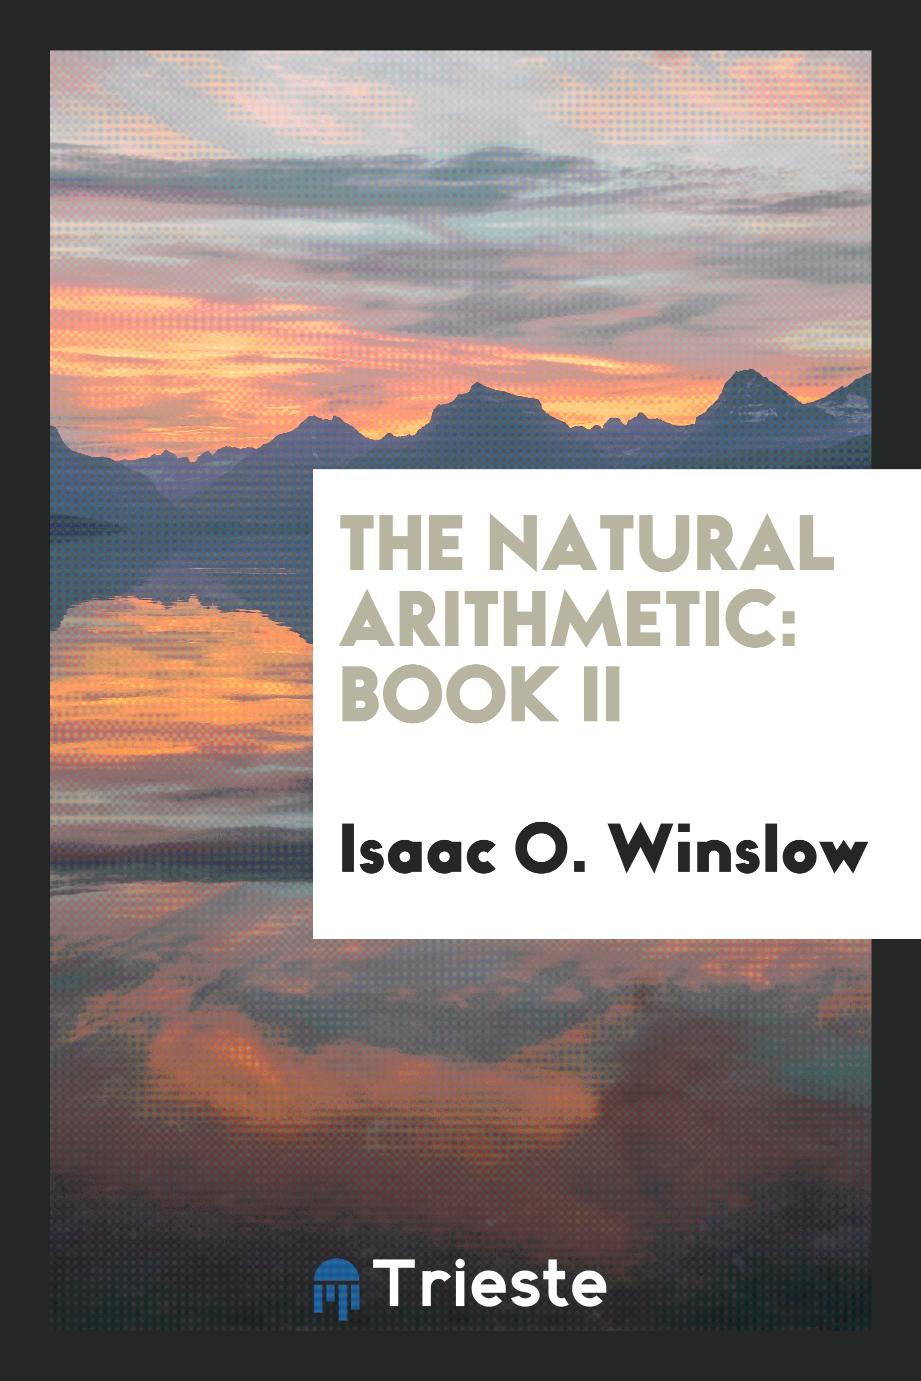 The Natural Arithmetic: Book II